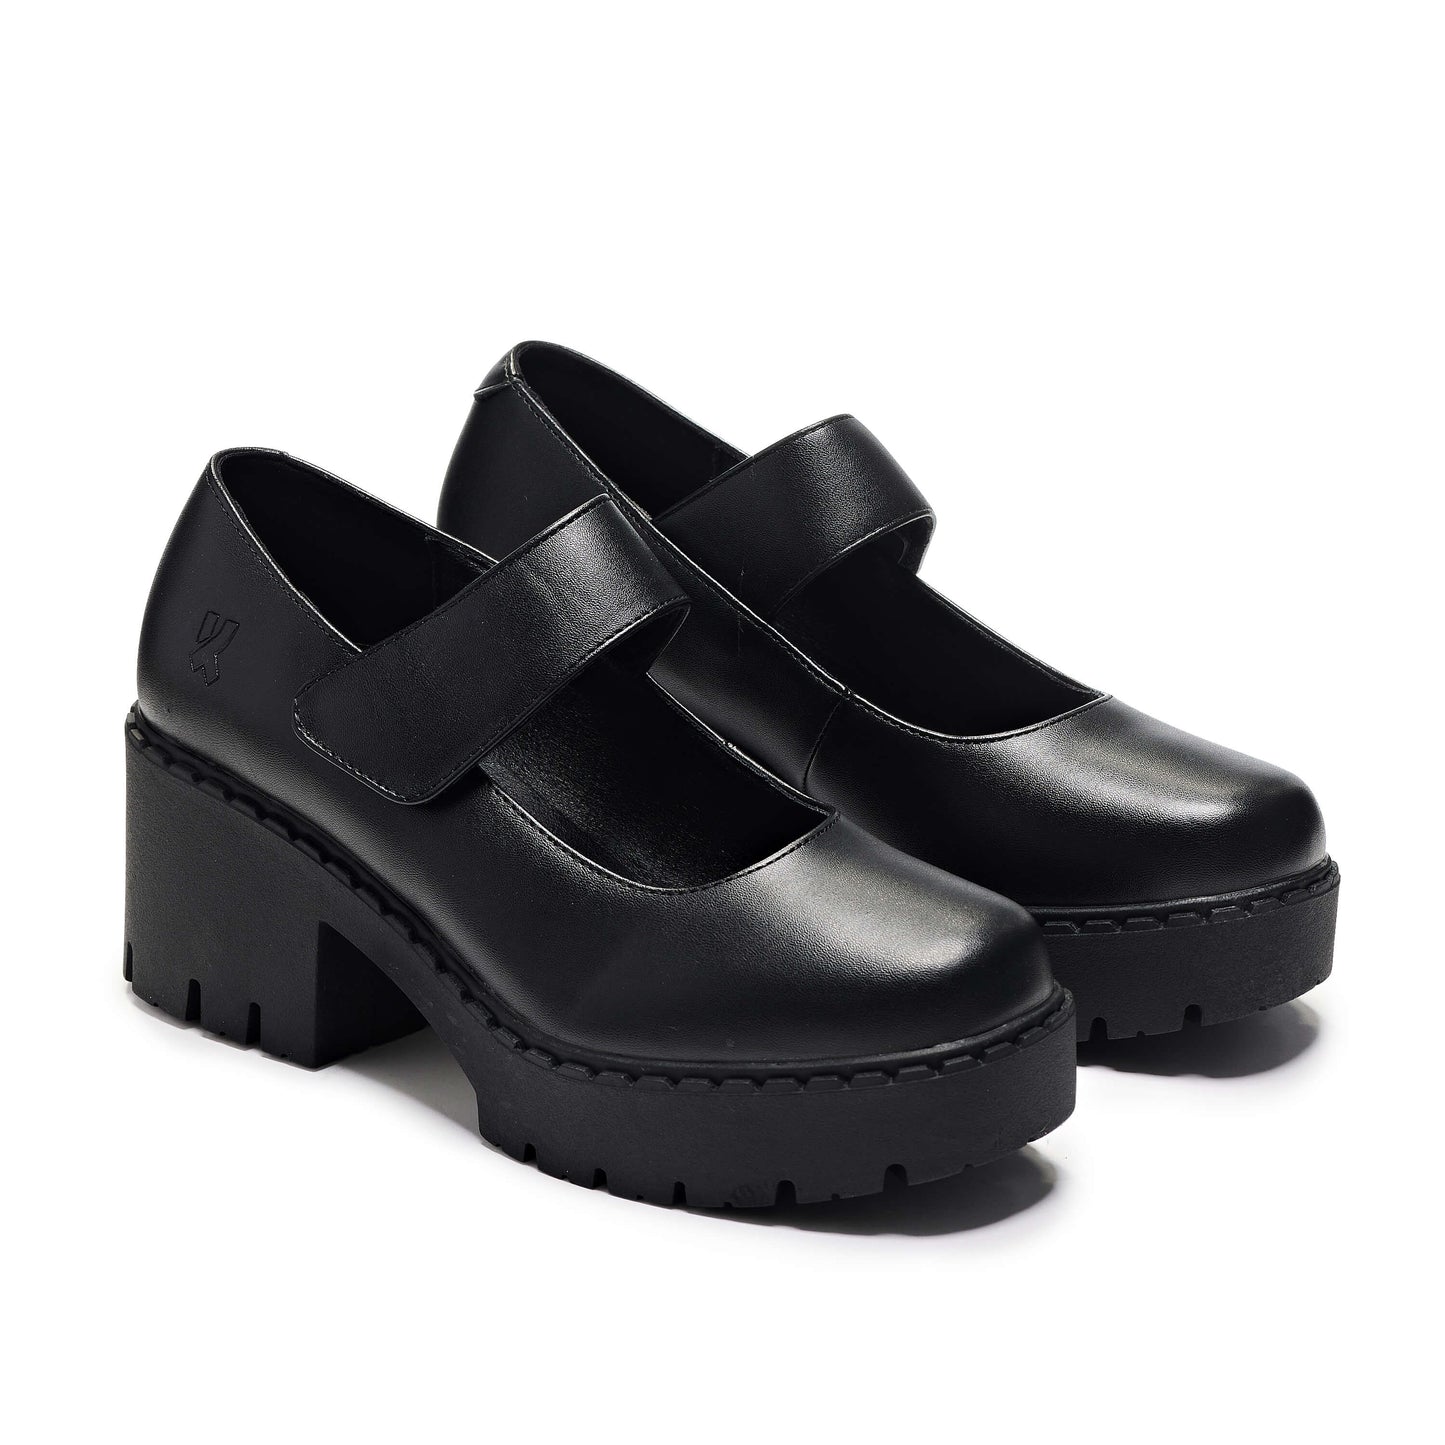 Beacons Switch Mary Jane Shoes - Mary Janes - KOI Footwear - Black - Three-Quarter View